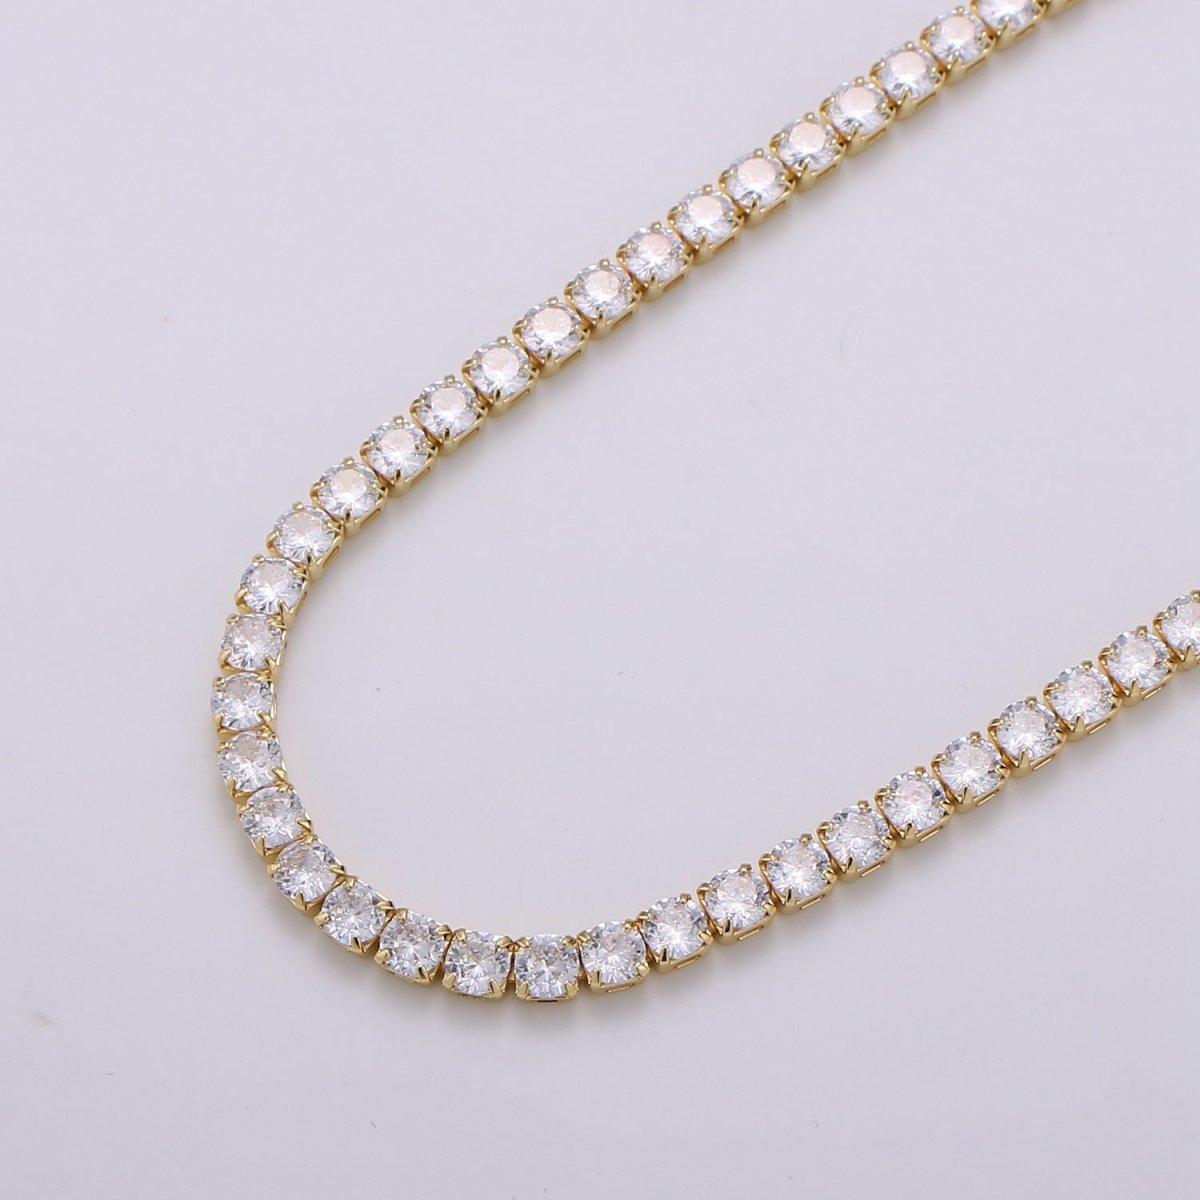 14.3'' Cubic Zirconia + 2.5" Extender Ready to Use 14K Gold Sparkly Necklace, Beautiful CZ Color Layering Necklace | CN-897, 898, 899 Clearance Pricing - DLUXCA